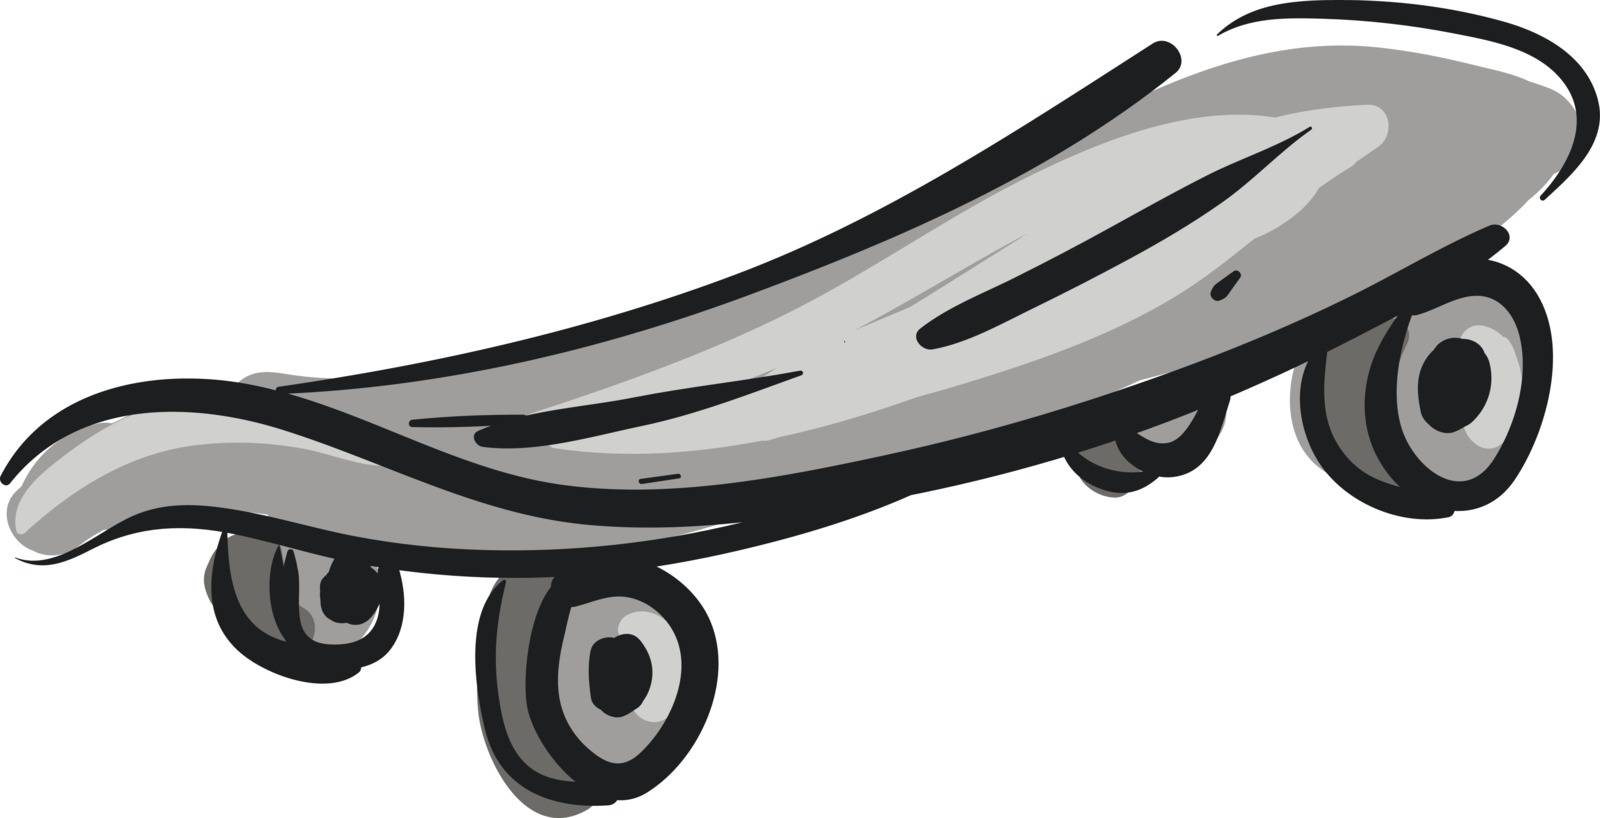 Grey skateboard with grey wheels illustration vector on white background